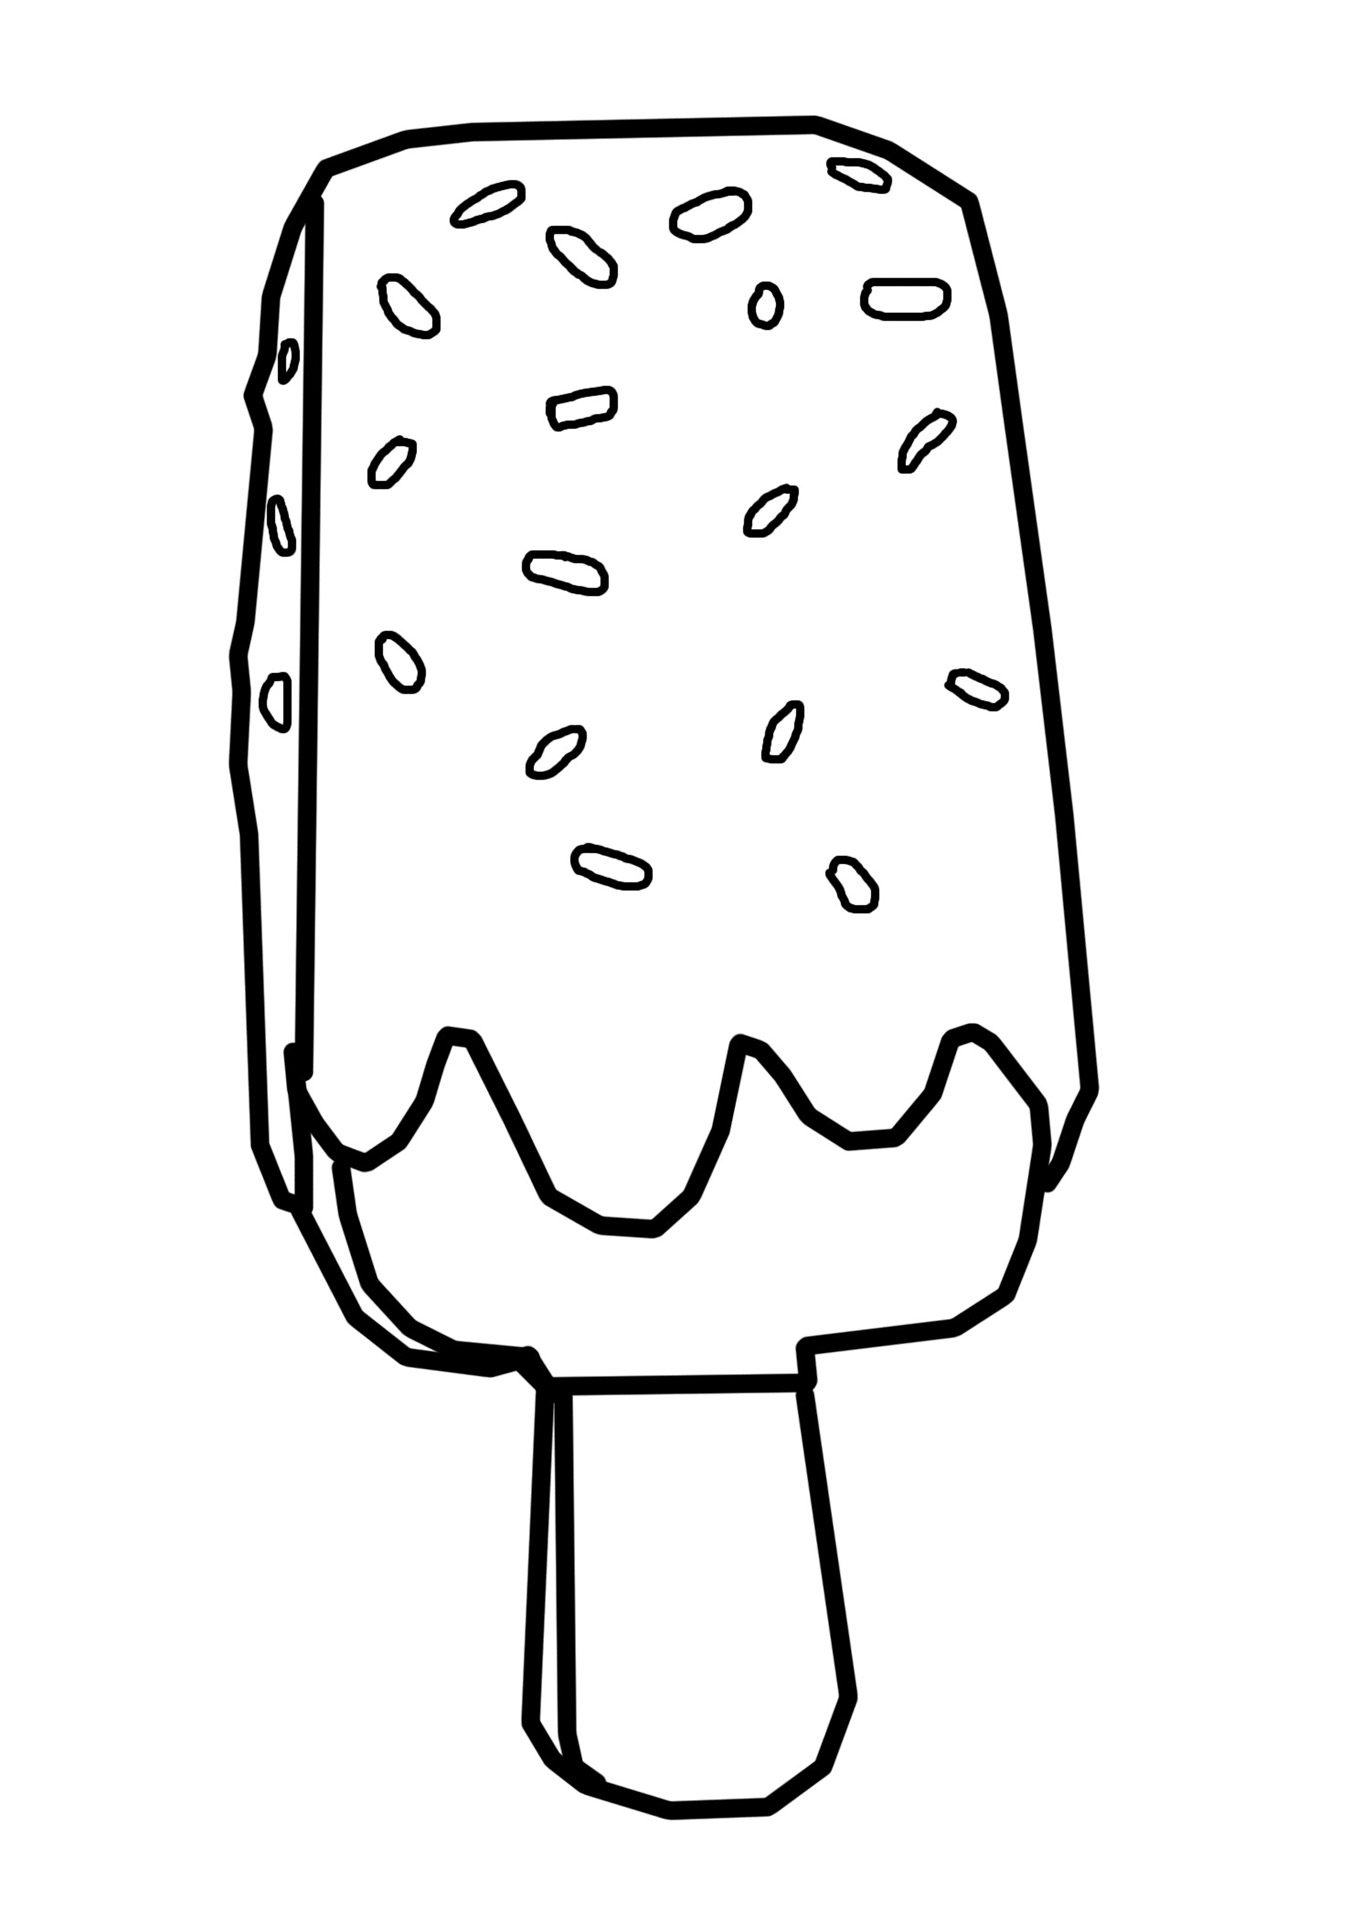 Popsicle Printable Coloring Page - Printable Templates